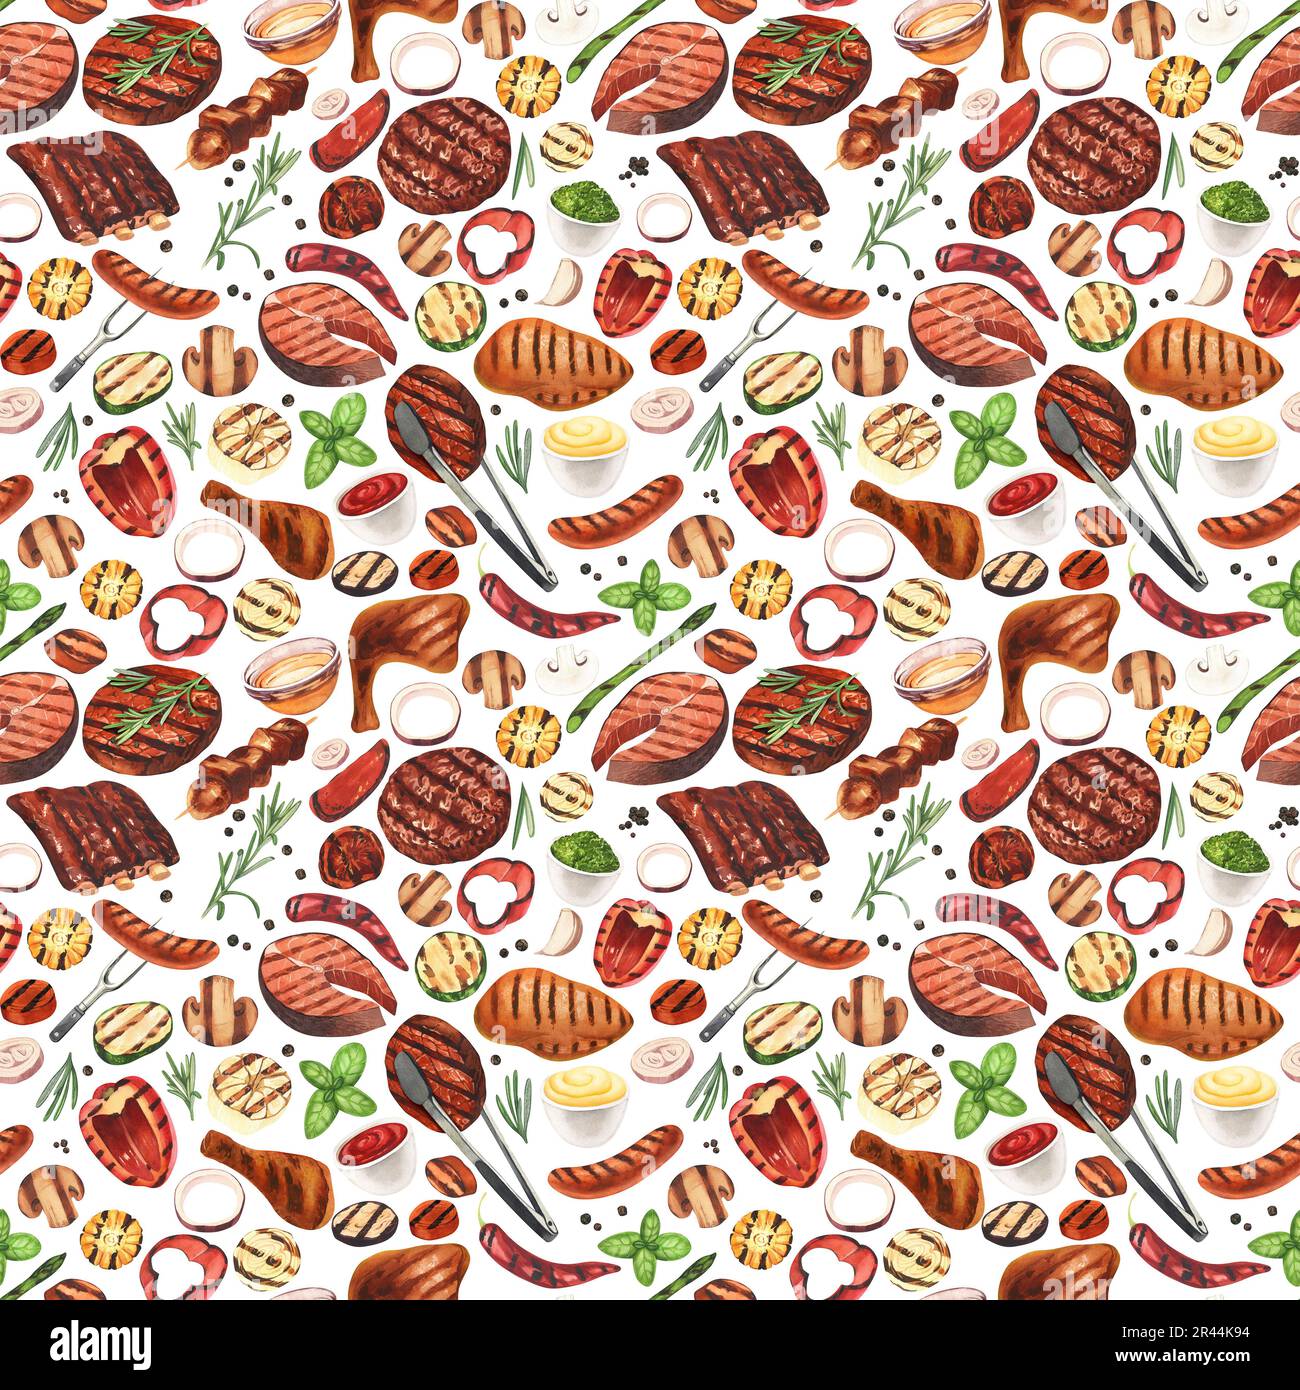 60+ Smoked And Grilled Meat Seamless Pattern Stock Illustrations